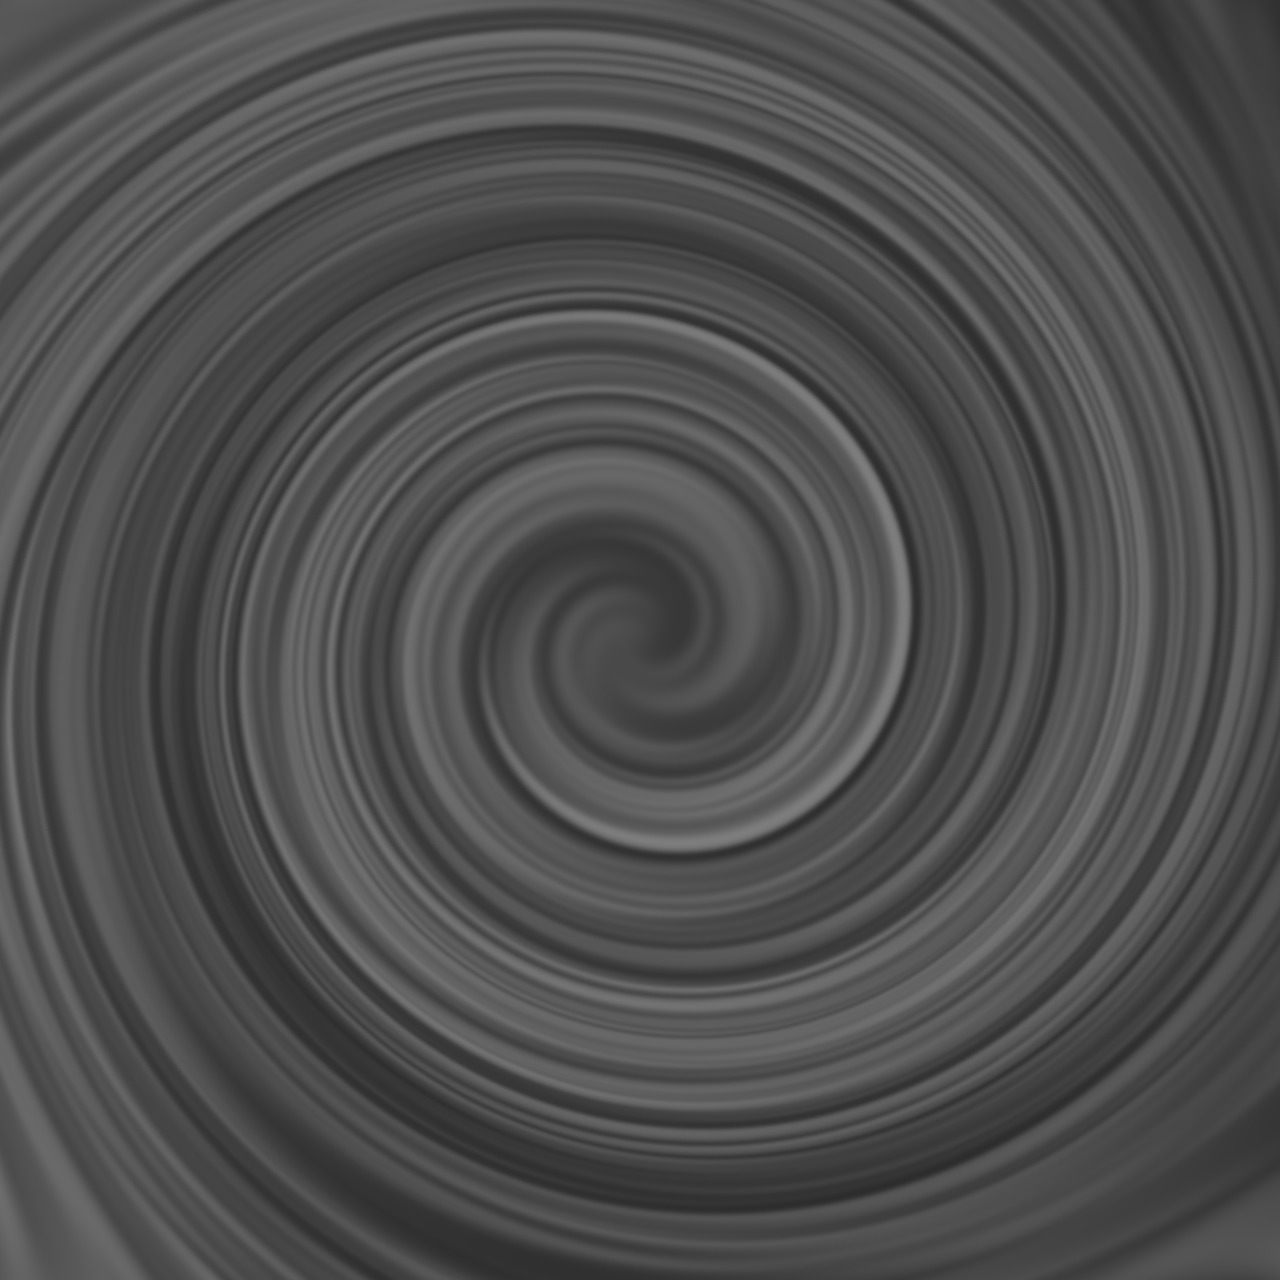 strudel spiral abstract free photo